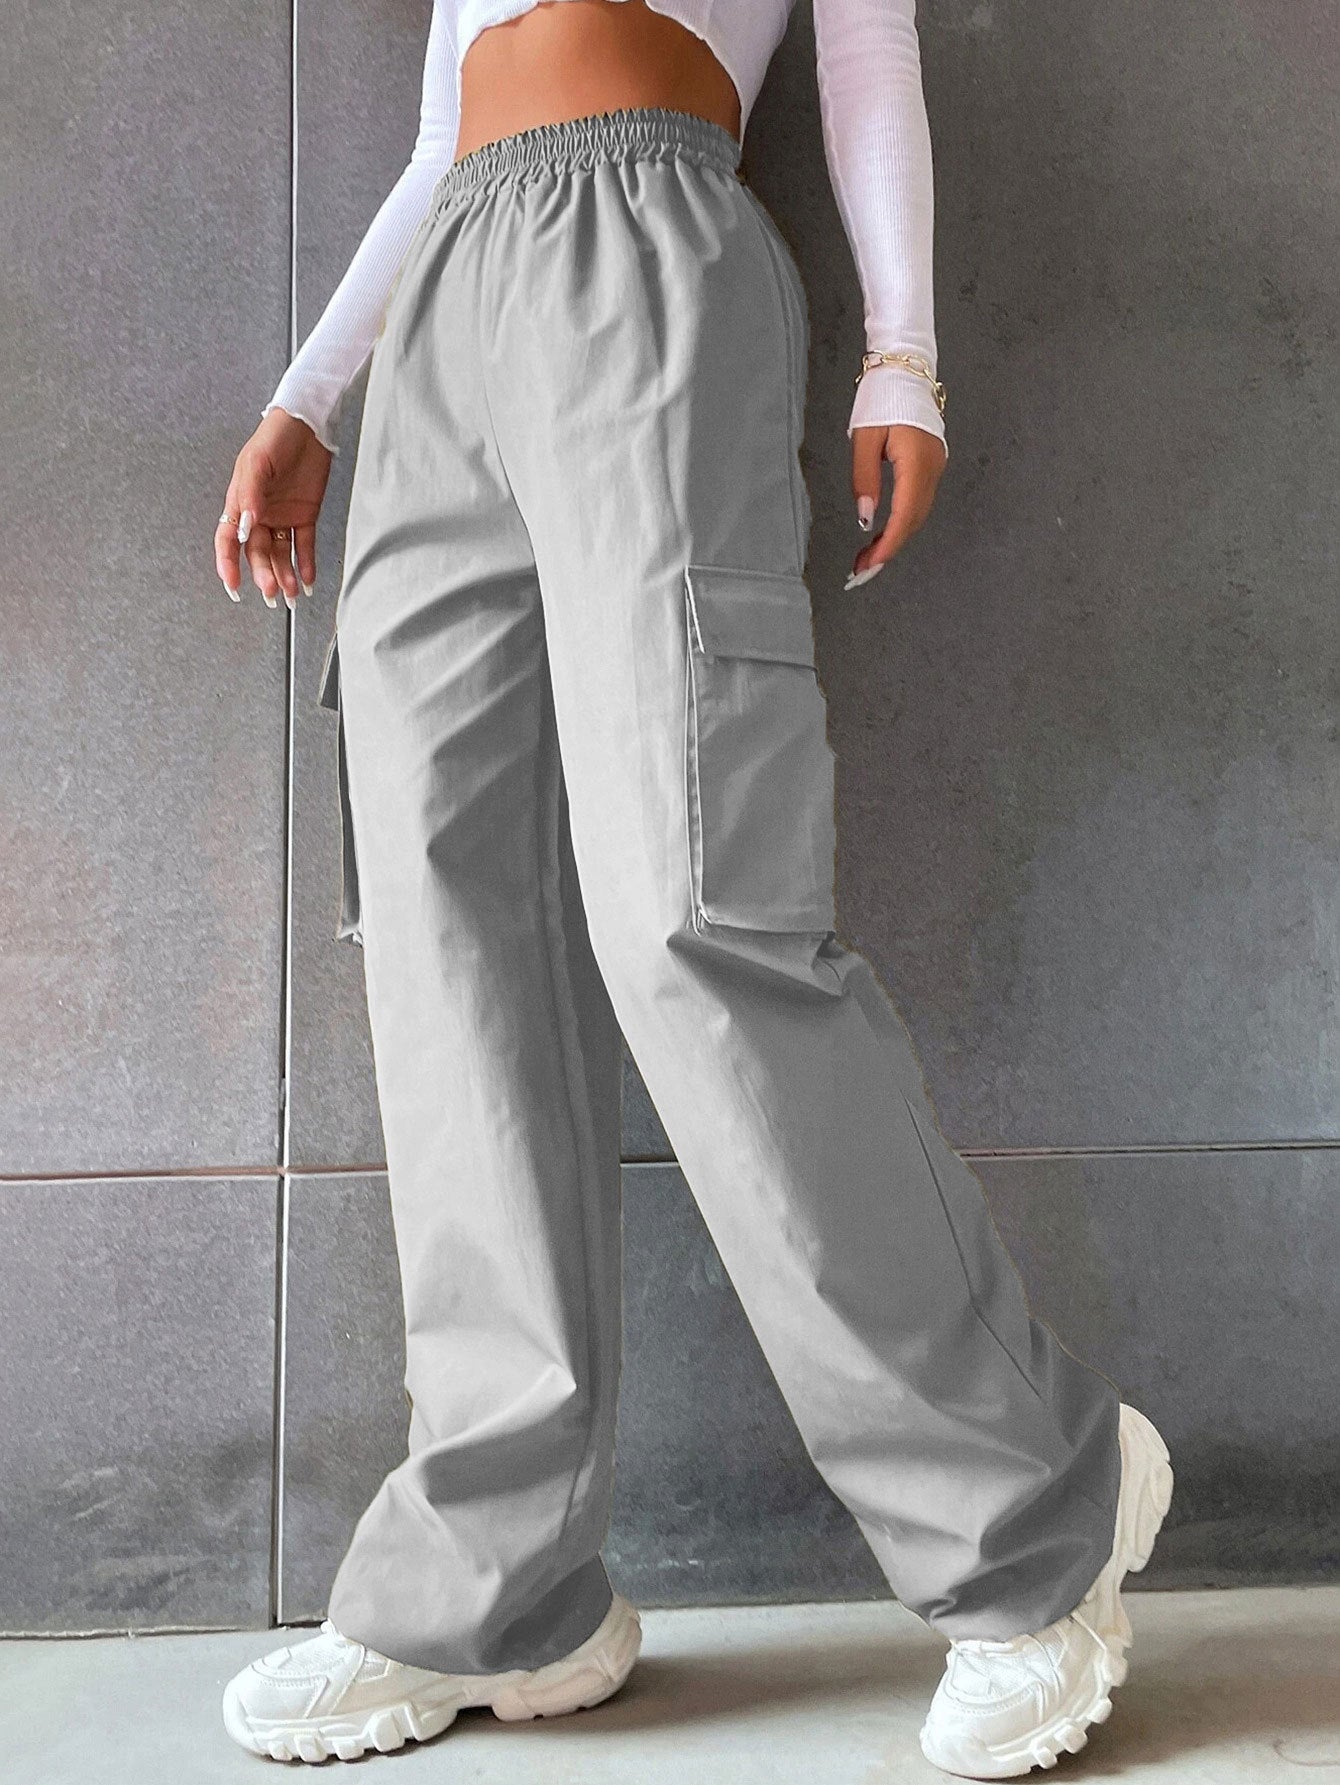 Women's fashion solid color high waist flip workwear with pocket pants